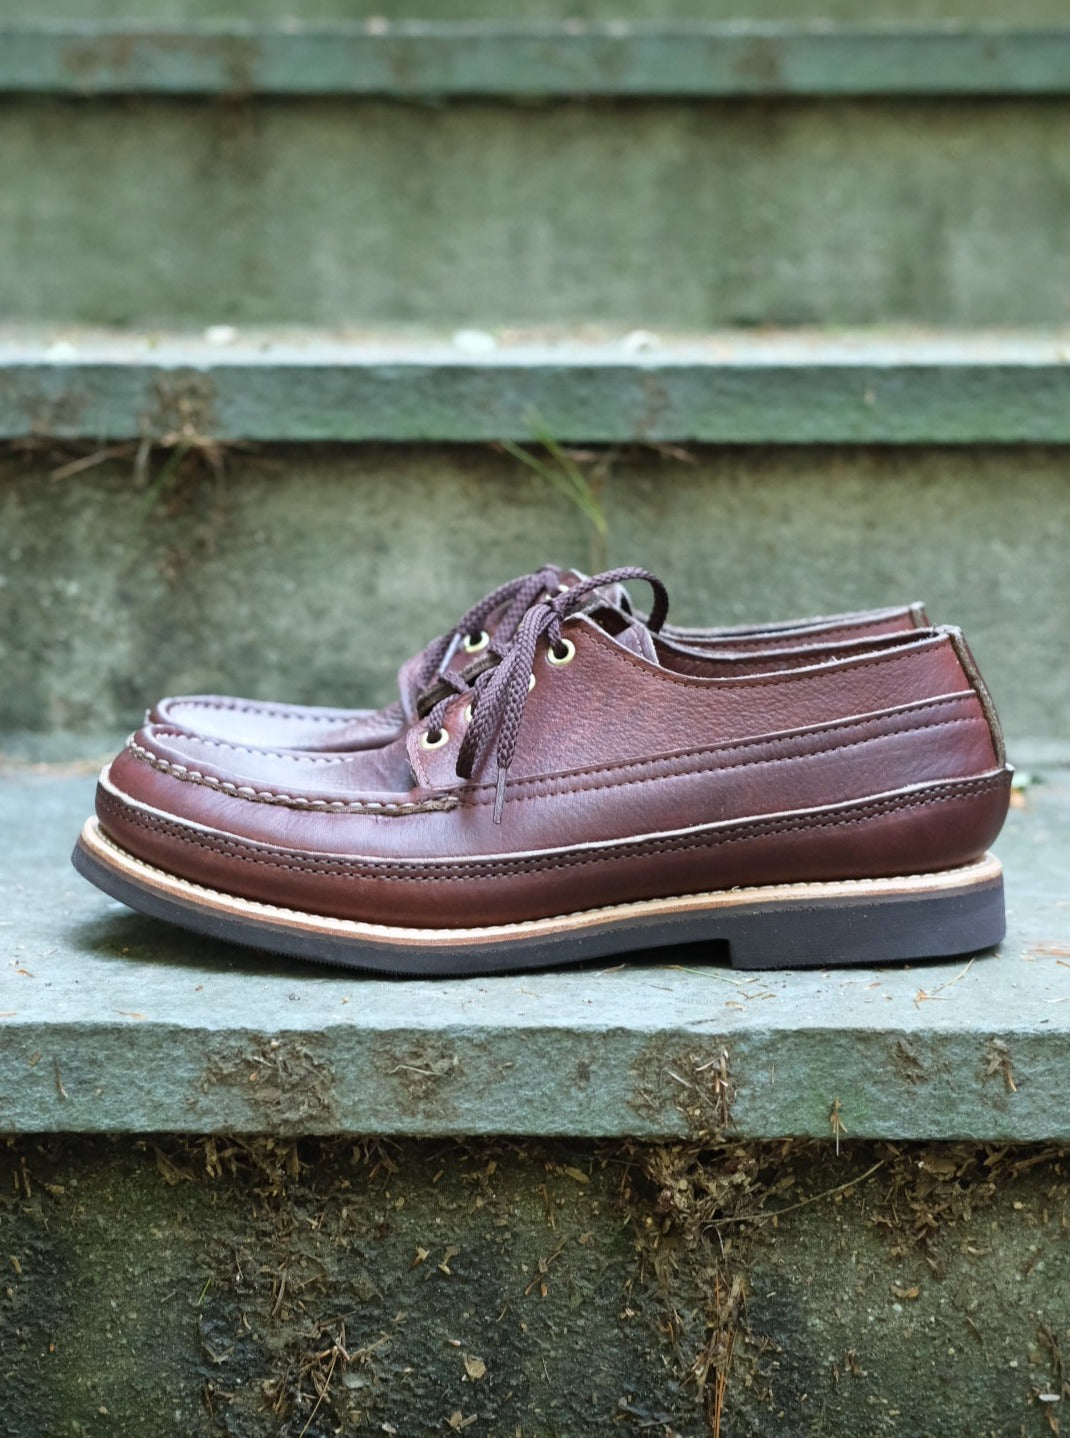 Russell_moccasin_stitchdown_Fishing_Oxfo